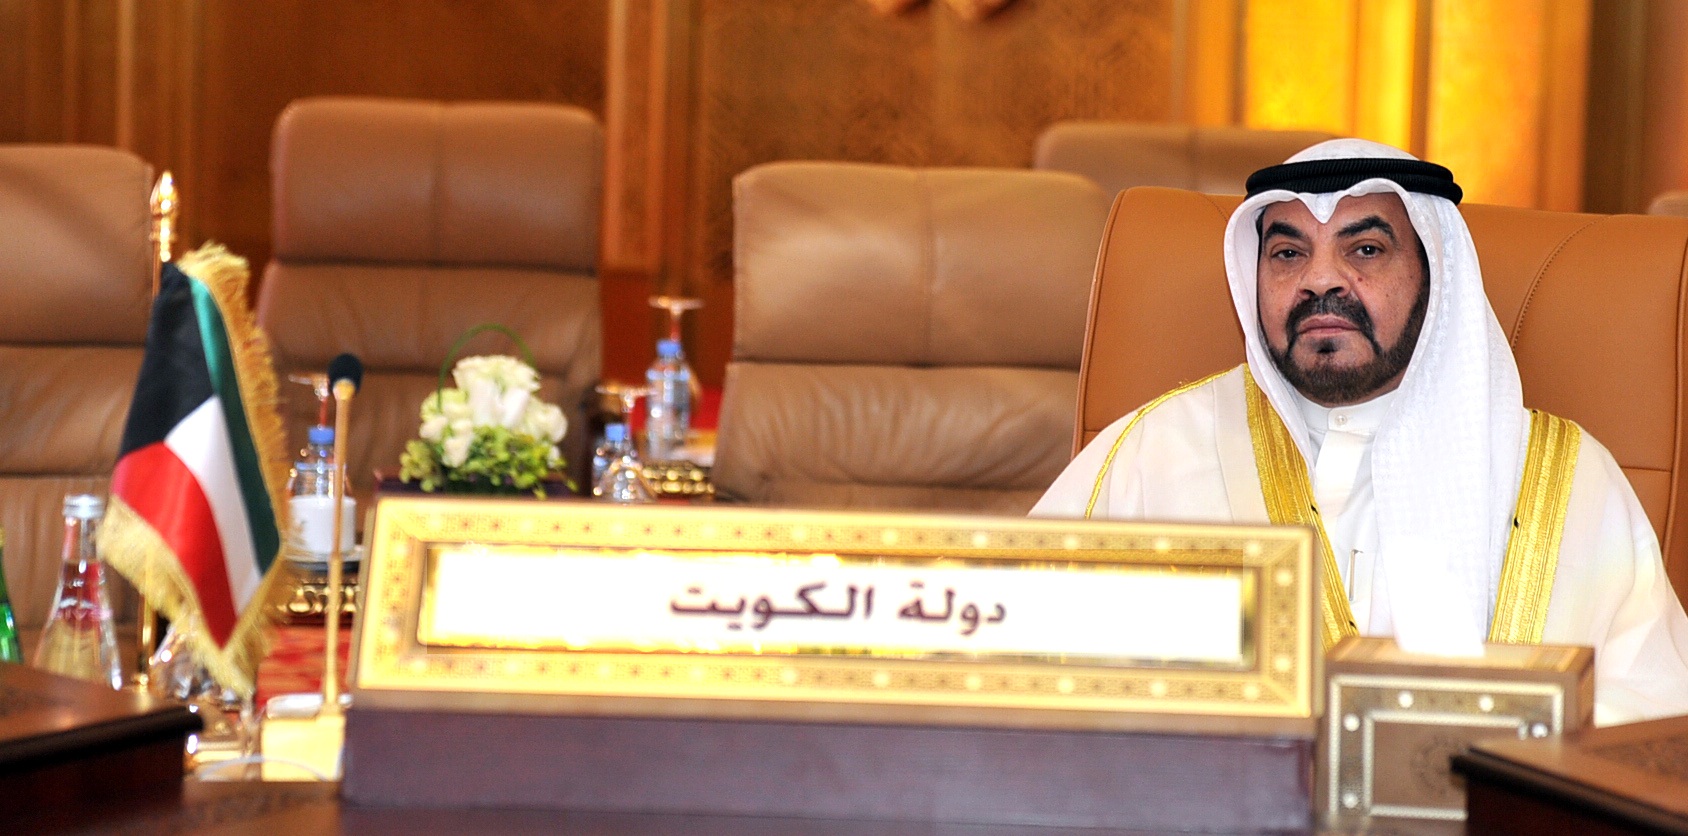 Kuwaiti Olympic Committee official Obaid Al-Enizi